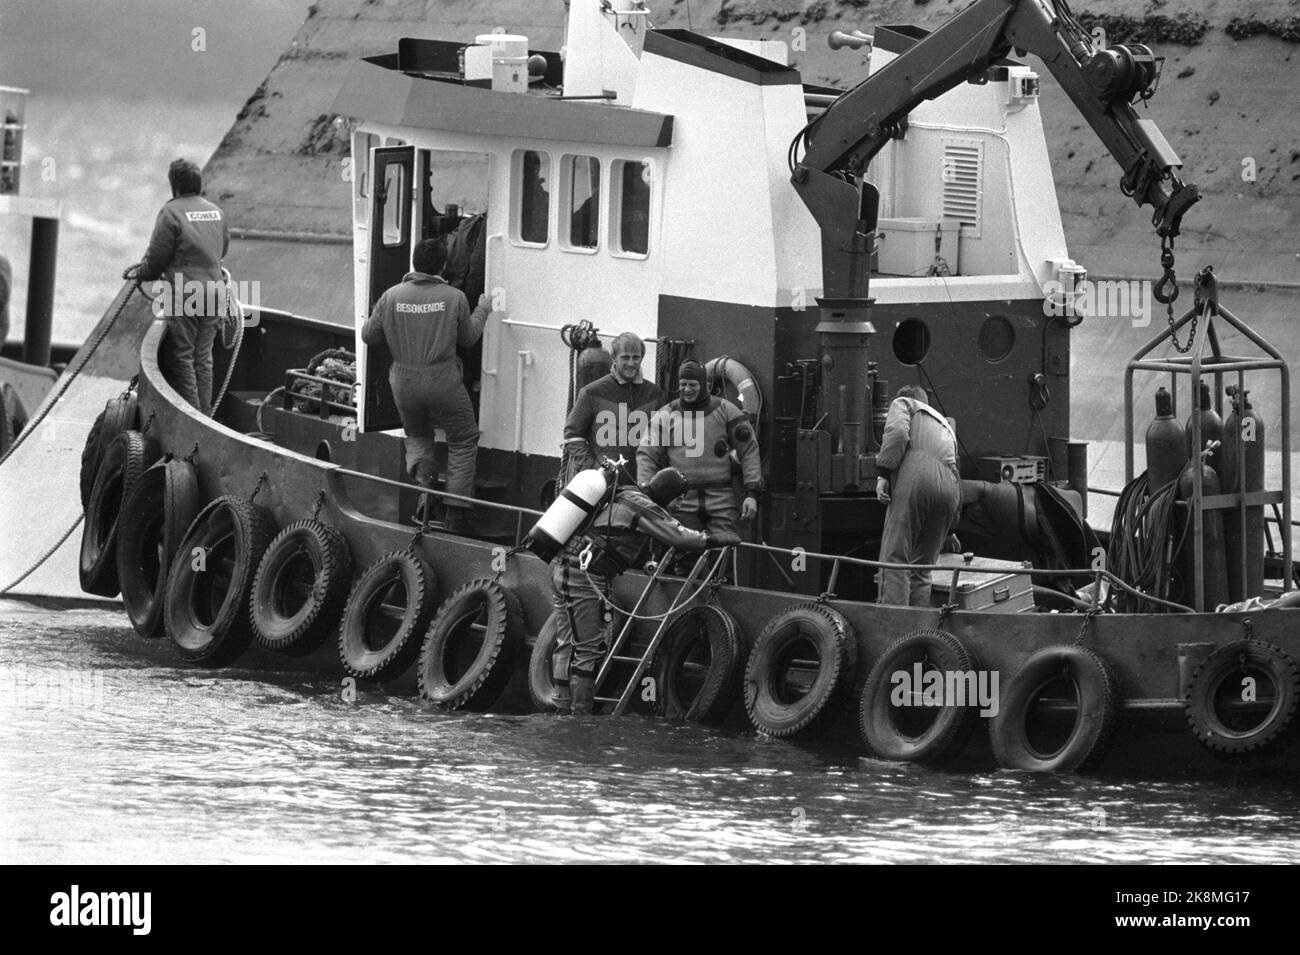 Stavanger 19851105: The cement vessel Concem crashed during the work on Gullfaks B Platform in the Gandsfjord, and 10 people perished. Here the overturned cement bargain. Ships with divers are looking for those killed. Here dives on board the vessel. Photo: Jens O. Kvale / NTB / NTB Stock Photo